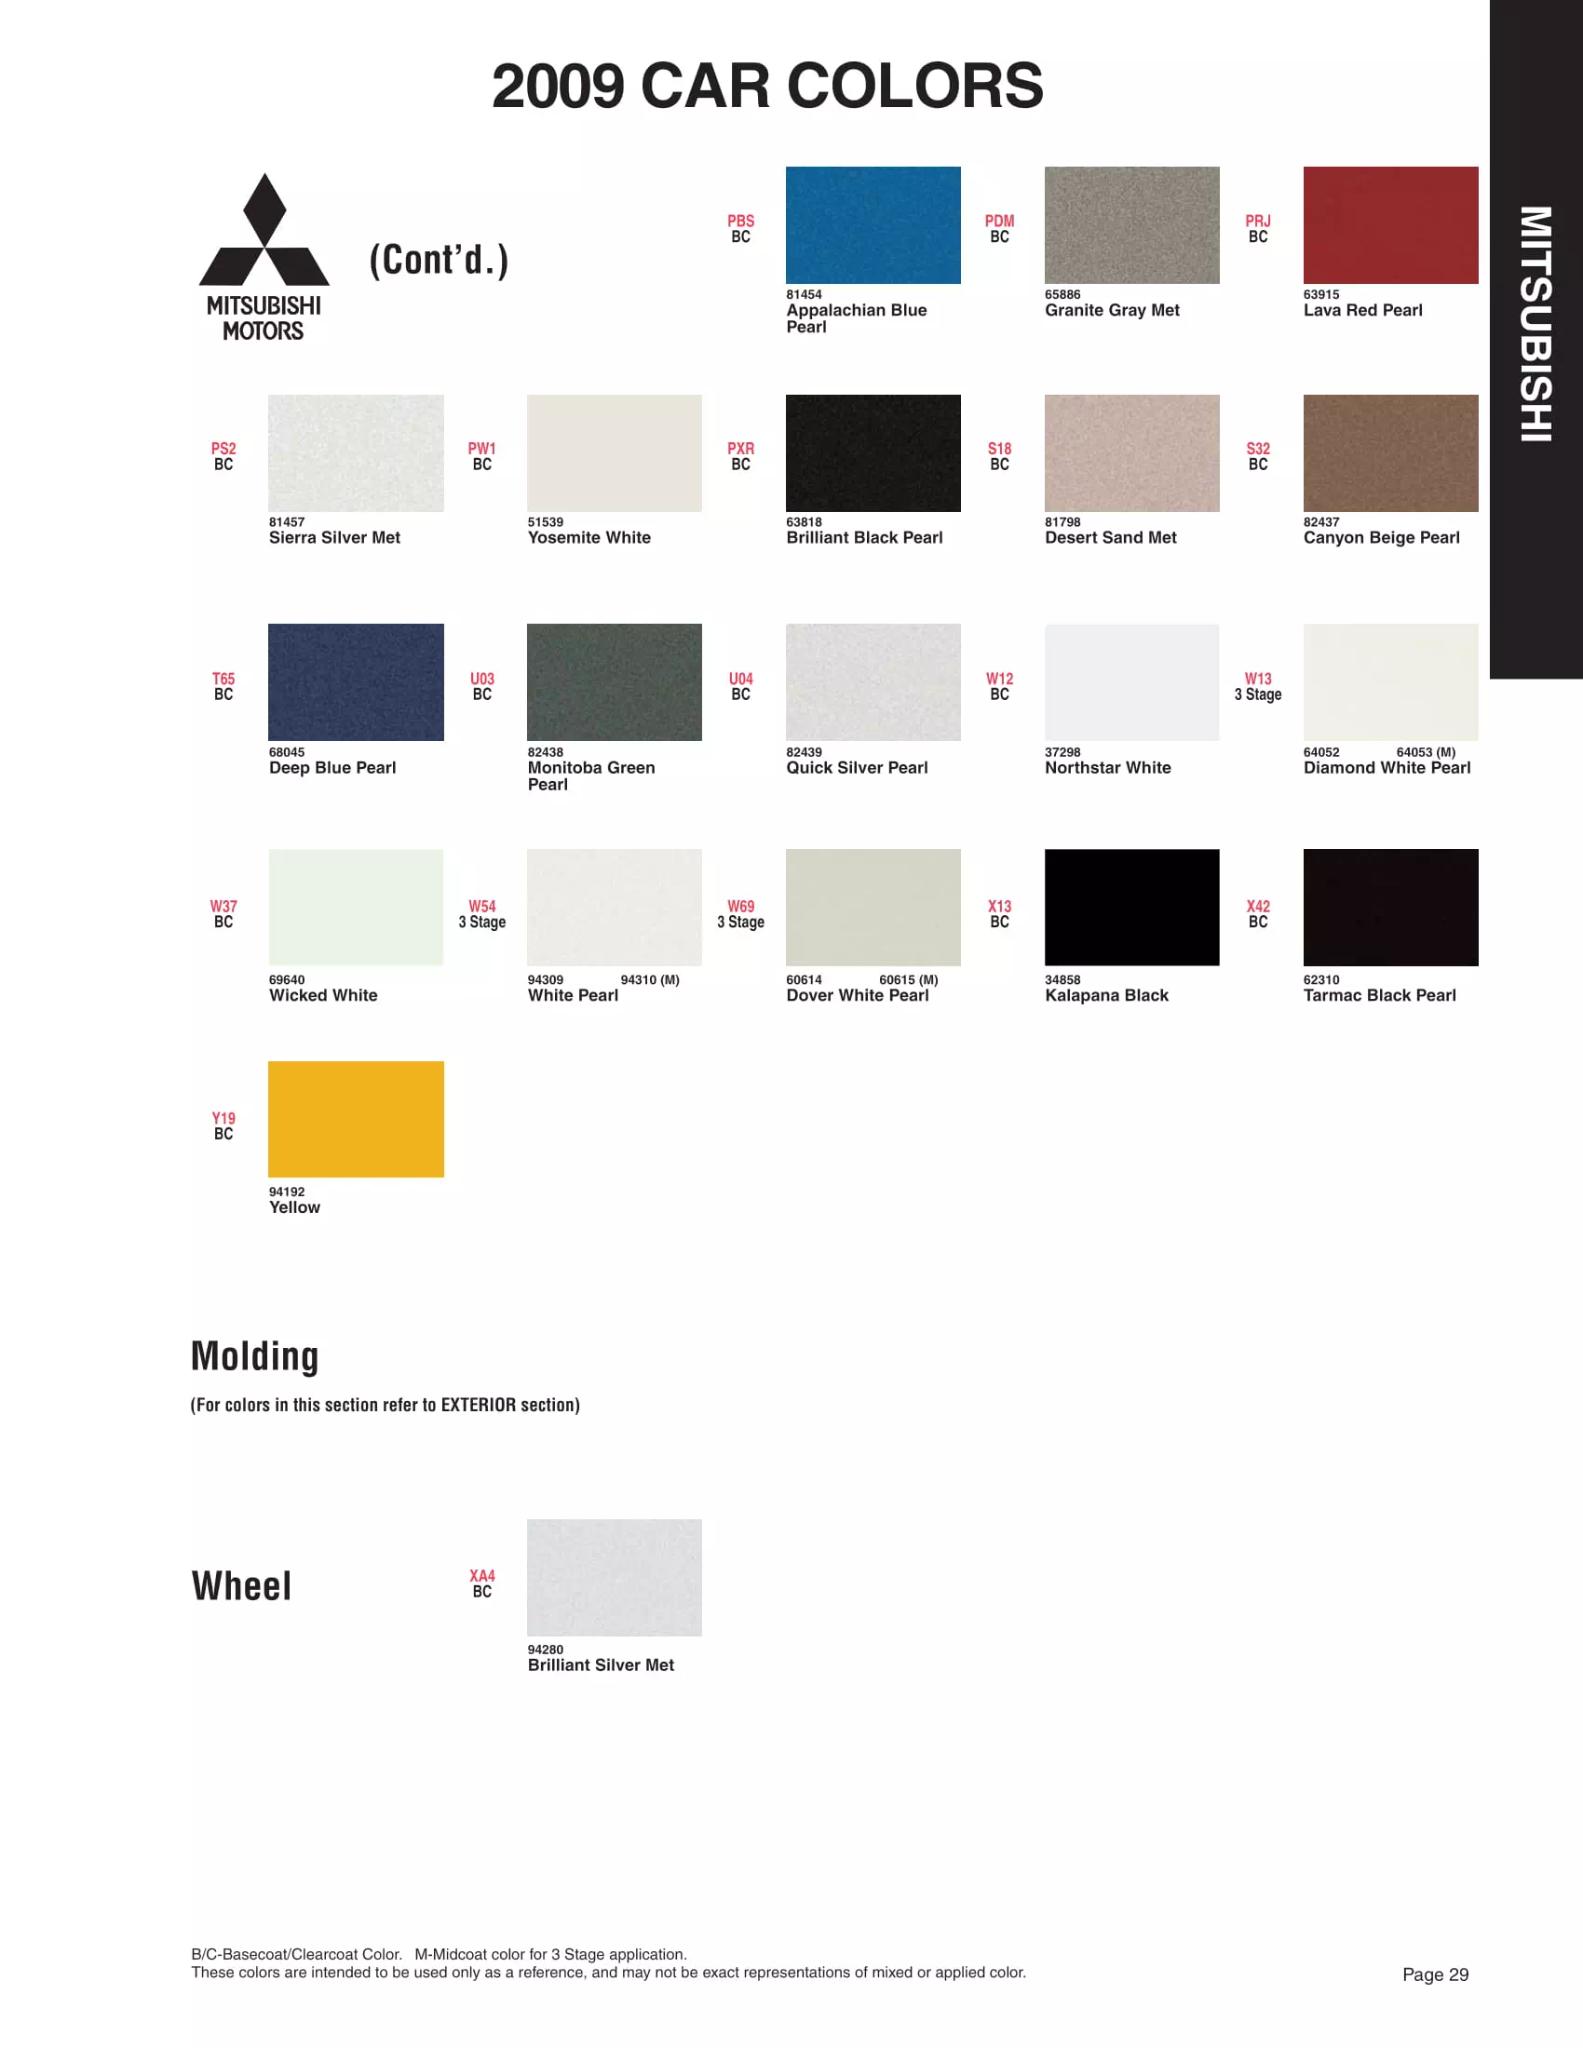 a paint code chart that shows color swatches, their names, and color codes for 2009 Mitsubishi automobiles.